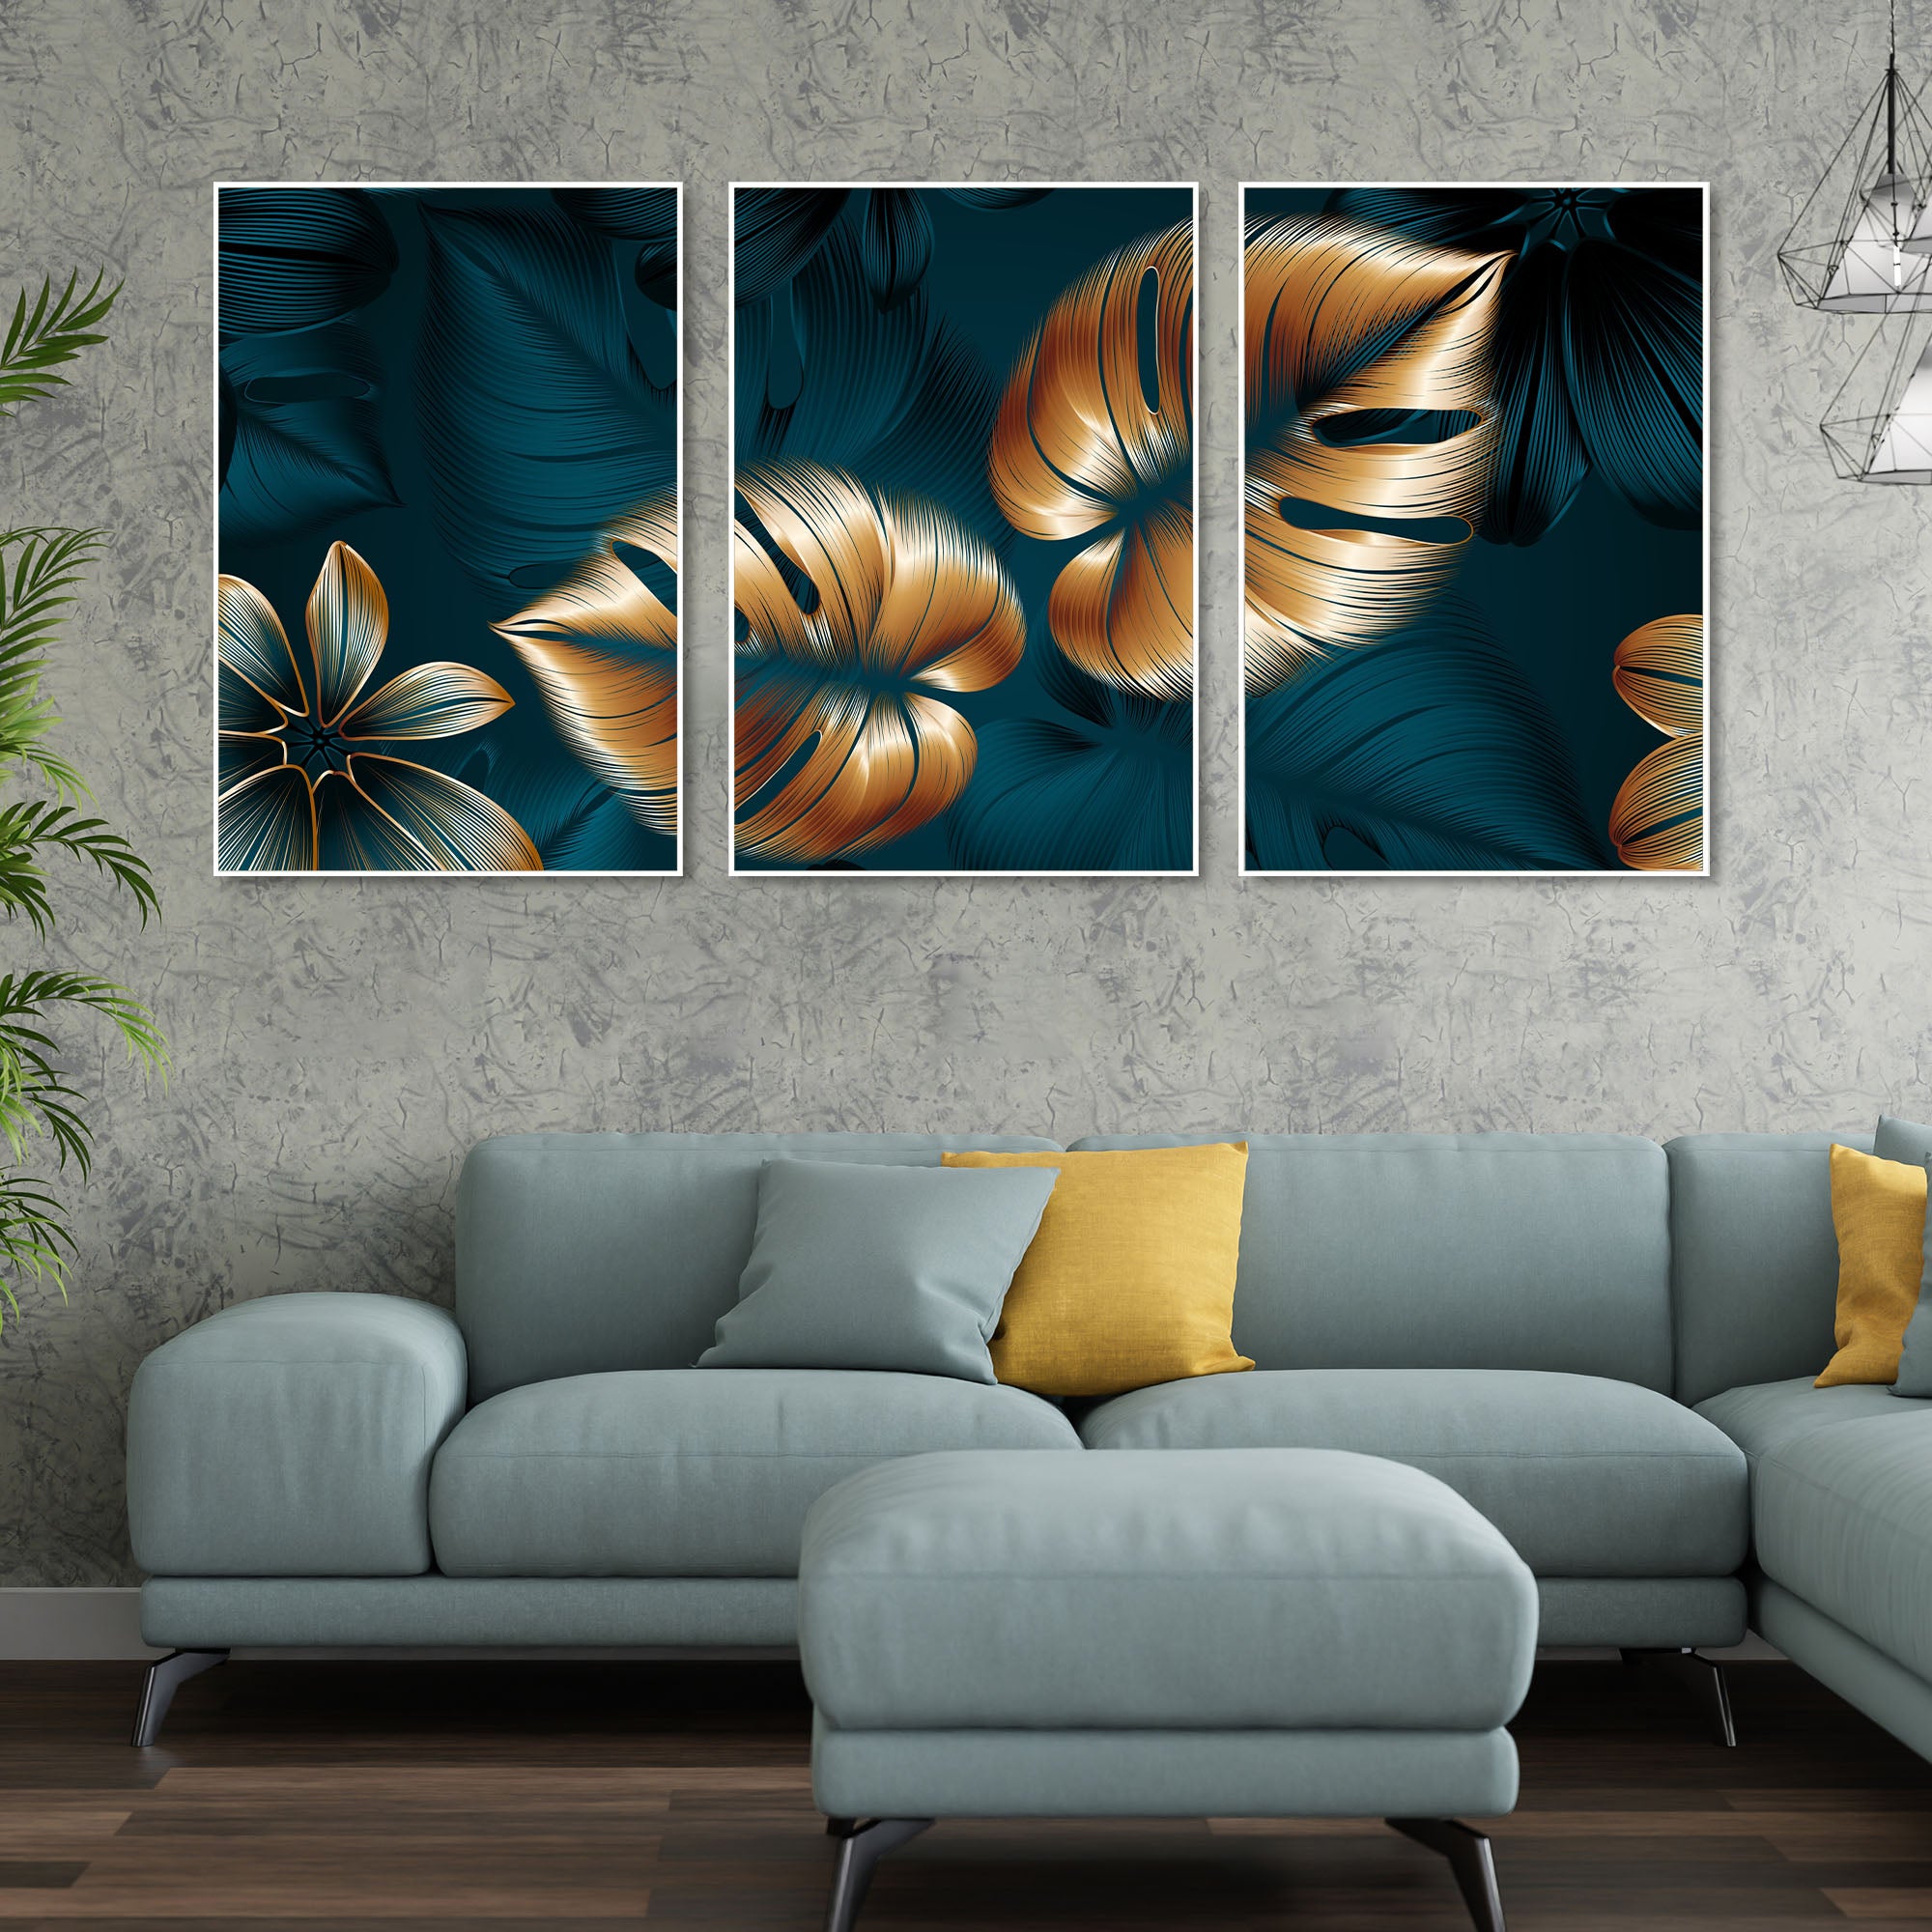 Shiny Golden Leaves Floating Canvas Wall Painting 